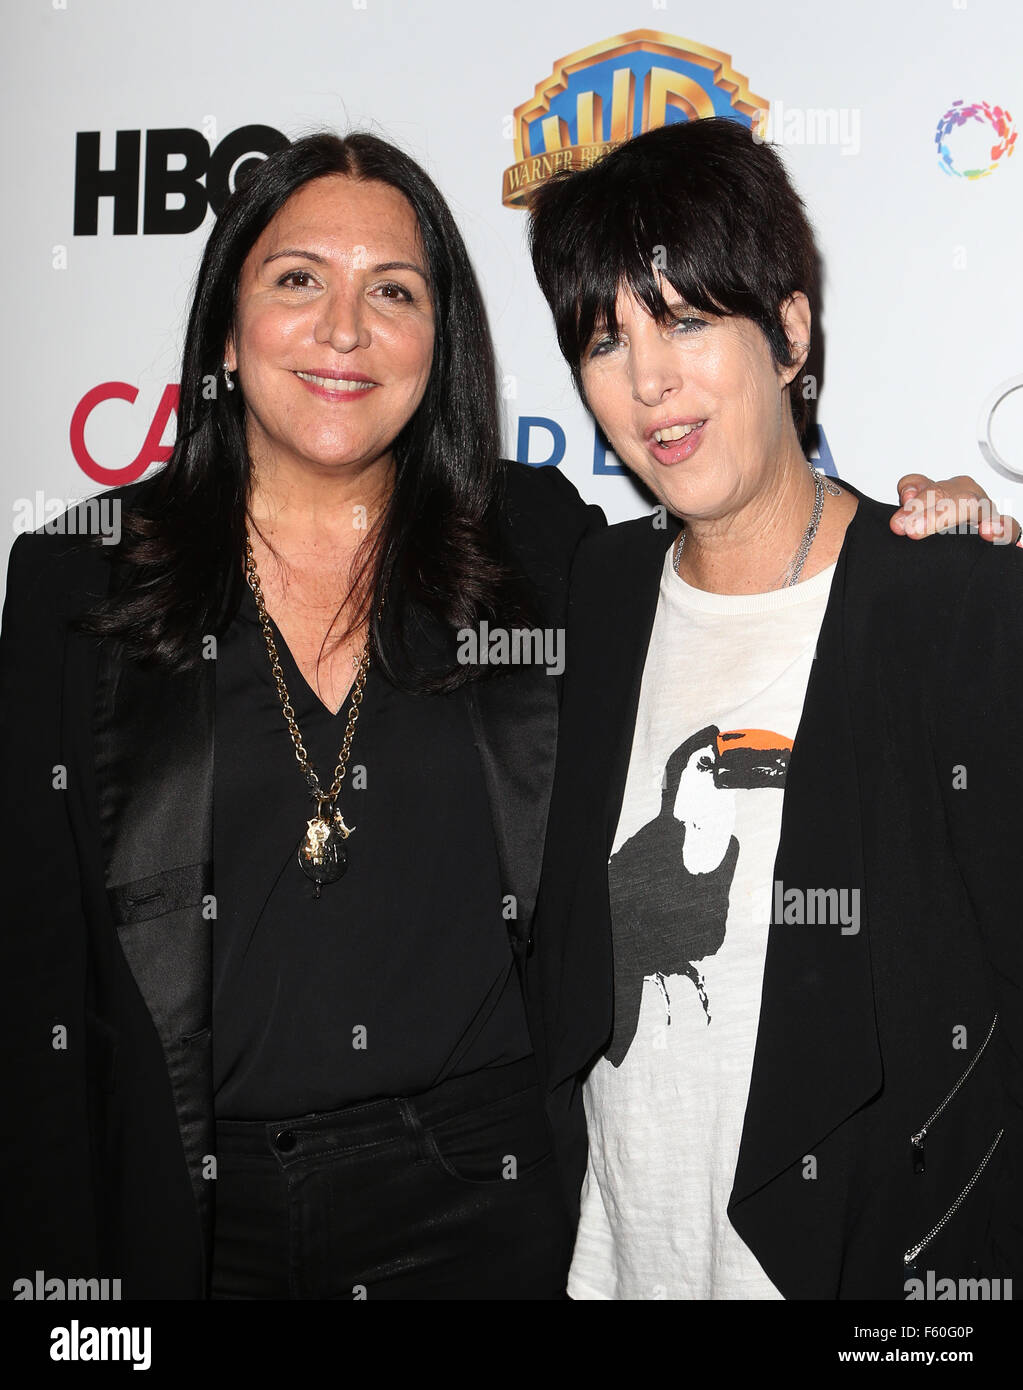 CHAIRS FOR CHARITY  Benefiting Homeless Youth Services At The Los Angeles LGBT Center  Featuring: Kathy Kloves, Diane Warren Where: Culver City, California, United States When: 24 Sep 2015 Stock Photo